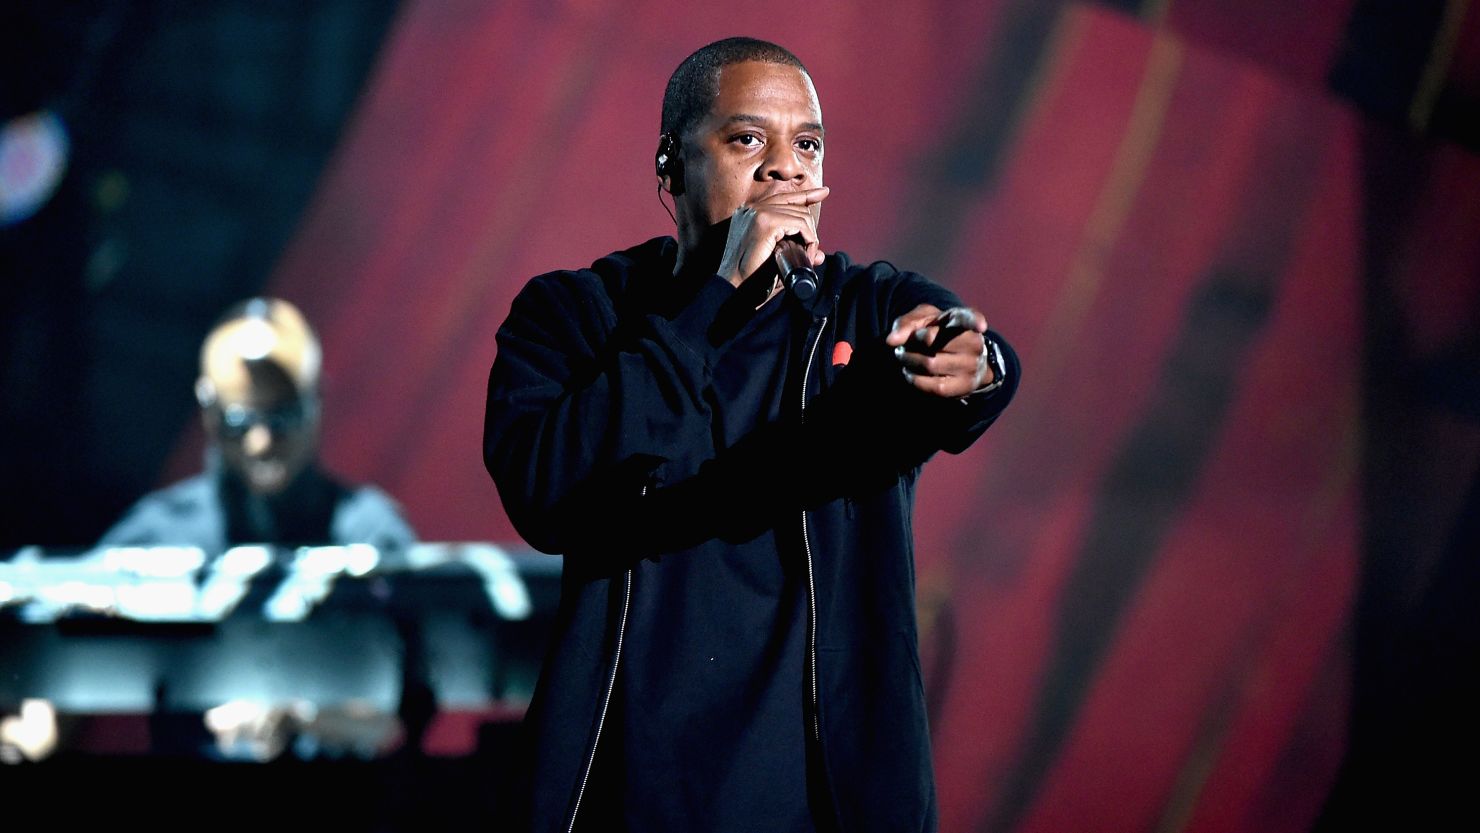 Jay Z performs onstage at the 2014 Global Citizen Festival to end extreme poverty by 2030 in Central Park on September 27, 2014 in New York City. 